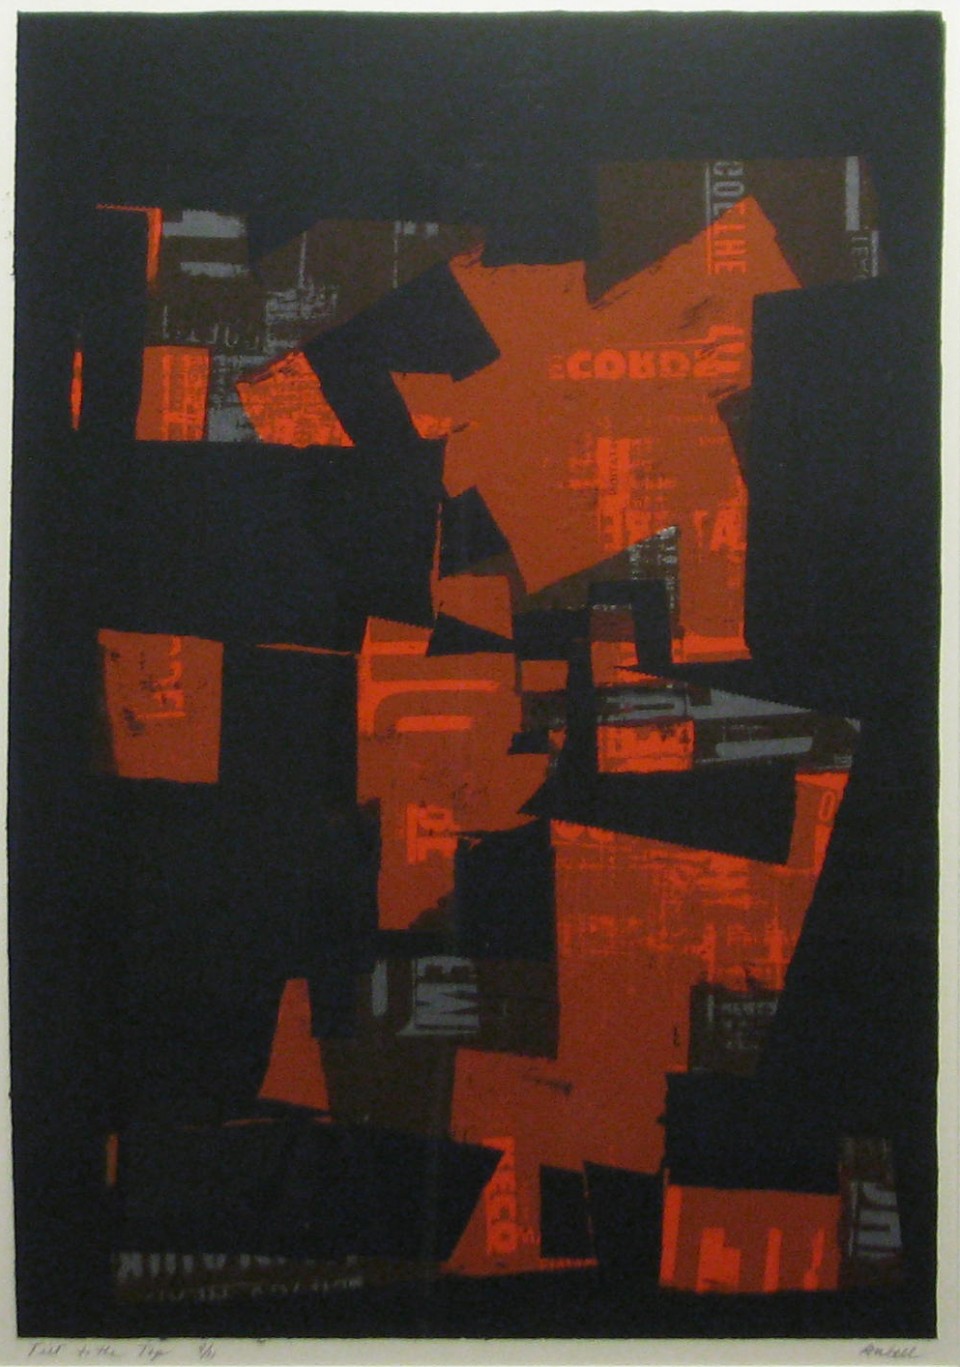 Tilt to the Top, 1977
serigraph
29 x 20
